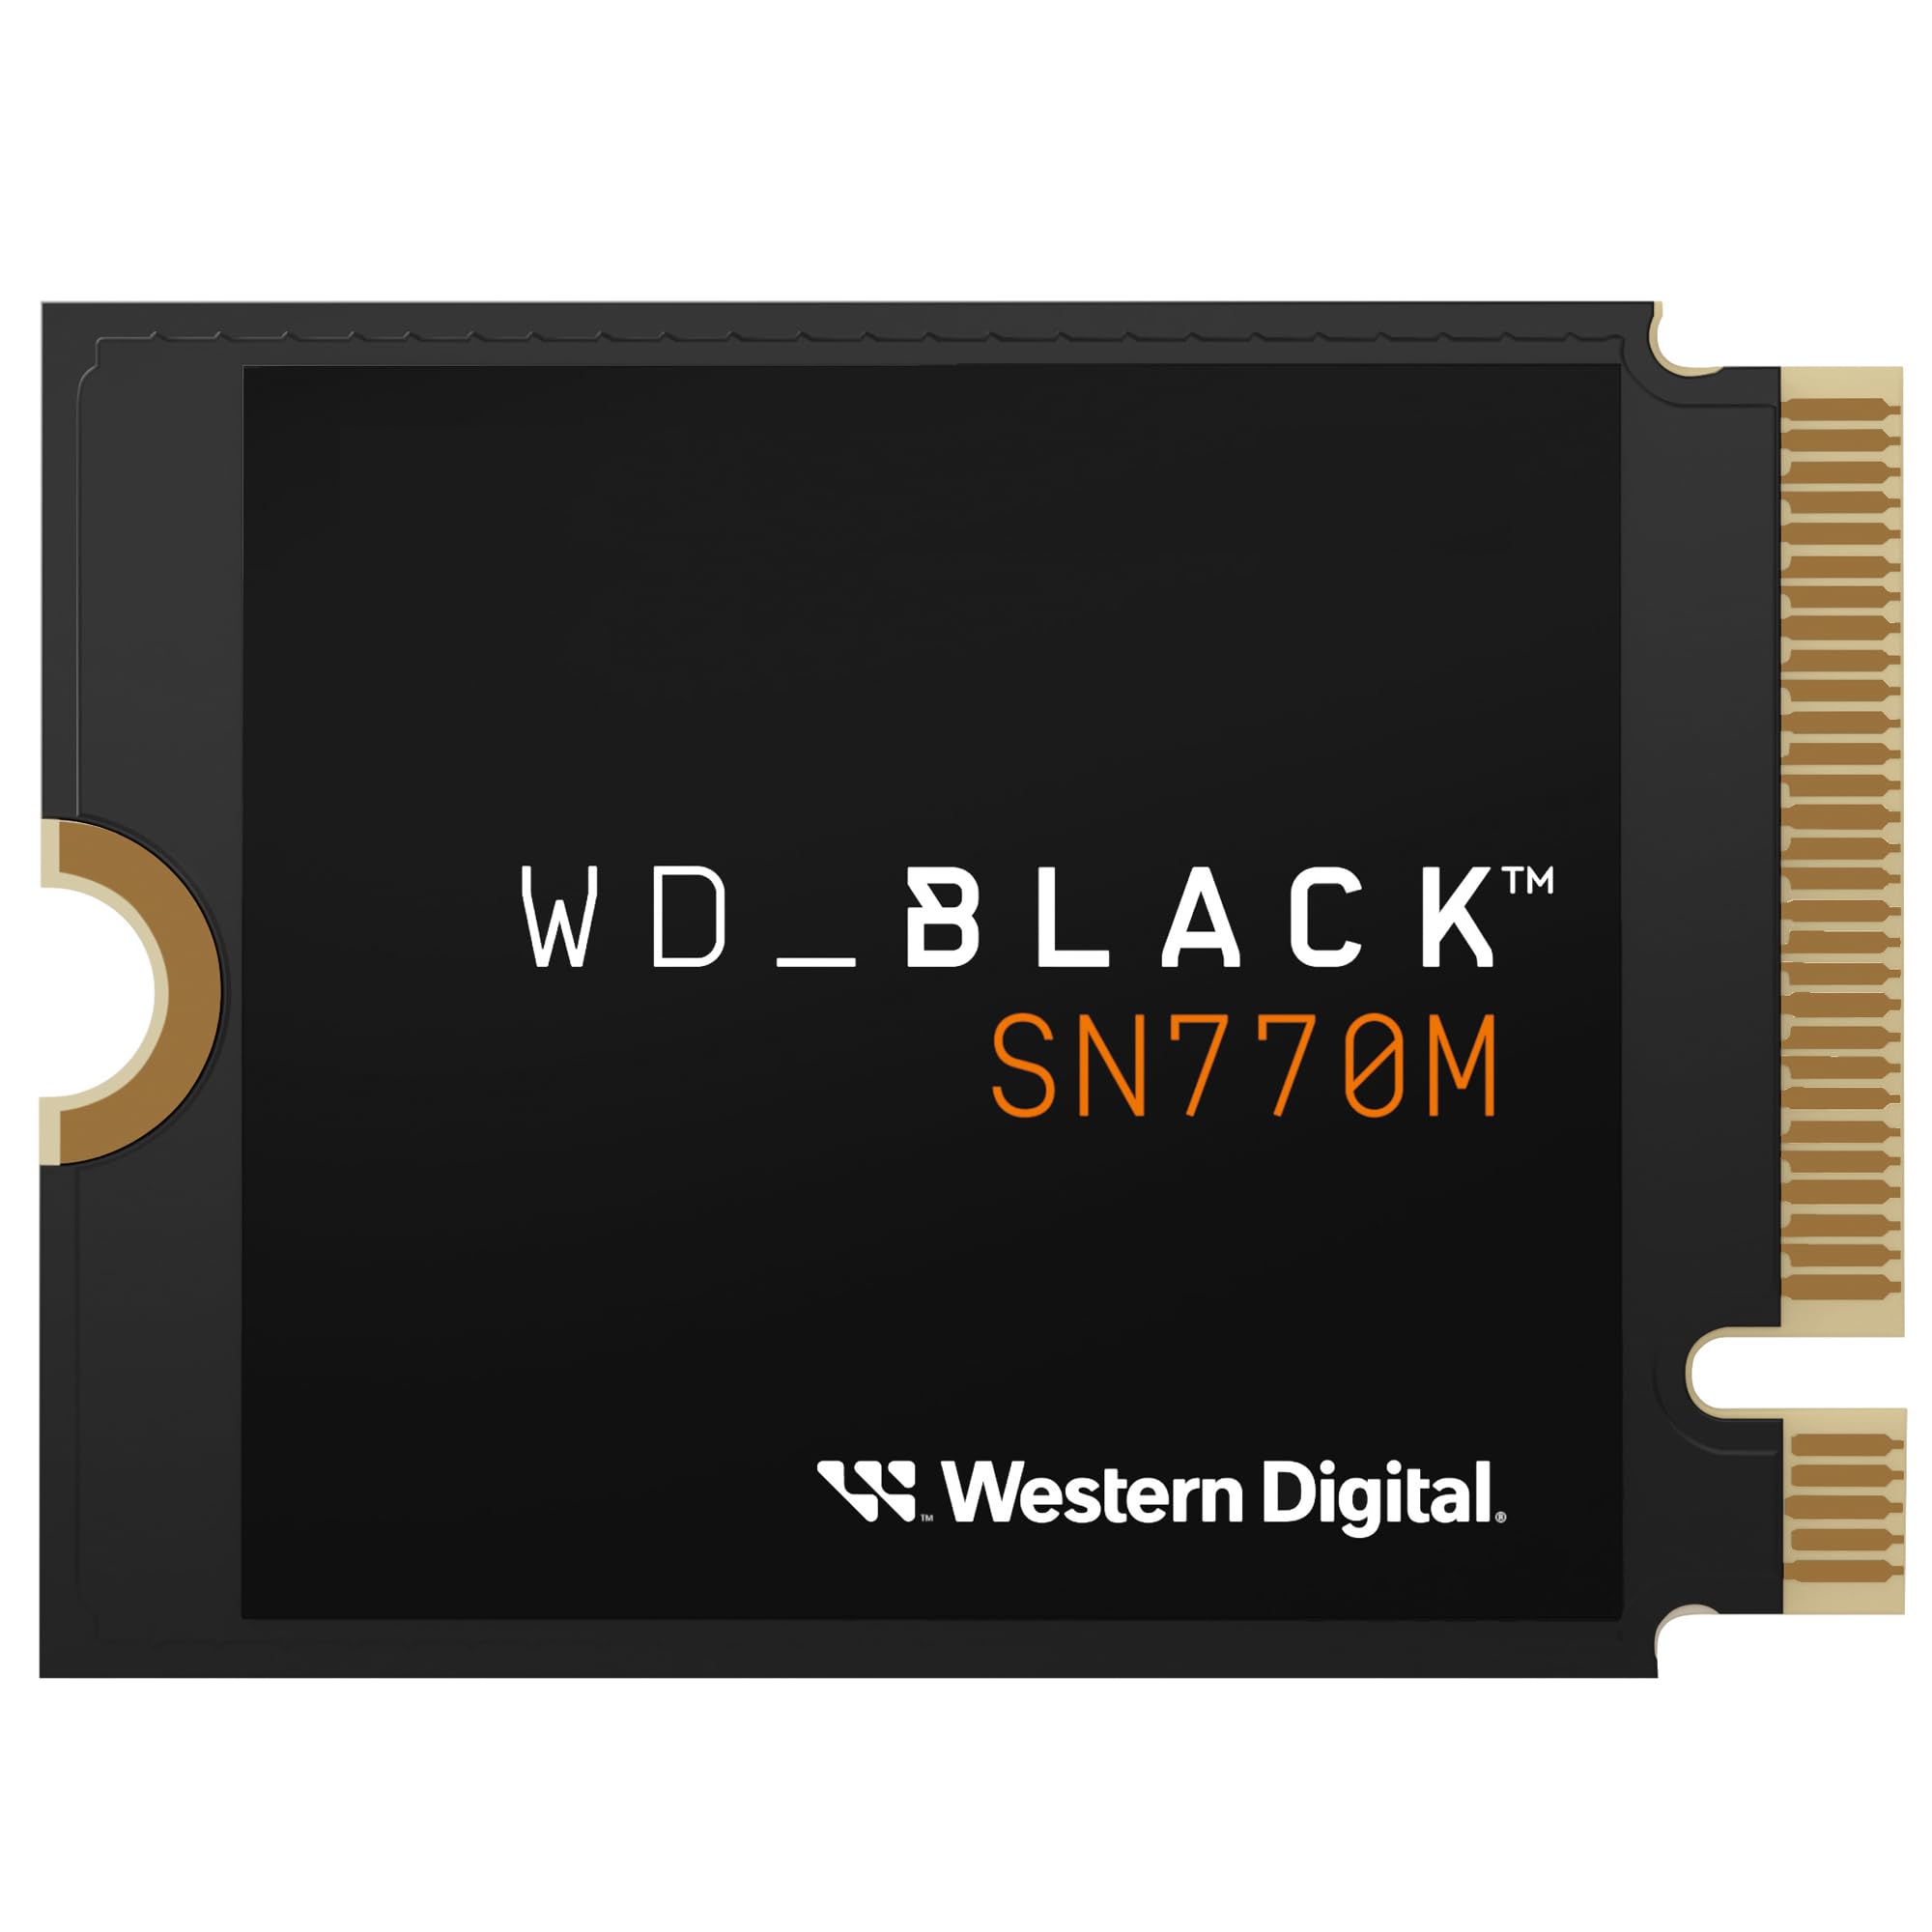 WD_BLACK 1TB SN770M M.2 2230 NVMe SSD for Handheld Gaming Devices, Speeds up to 5,150MB/s, TLC 3D NAND, Great for Steam Deck and Microsoft Surface - WDBDNH0010BBK-WRSN